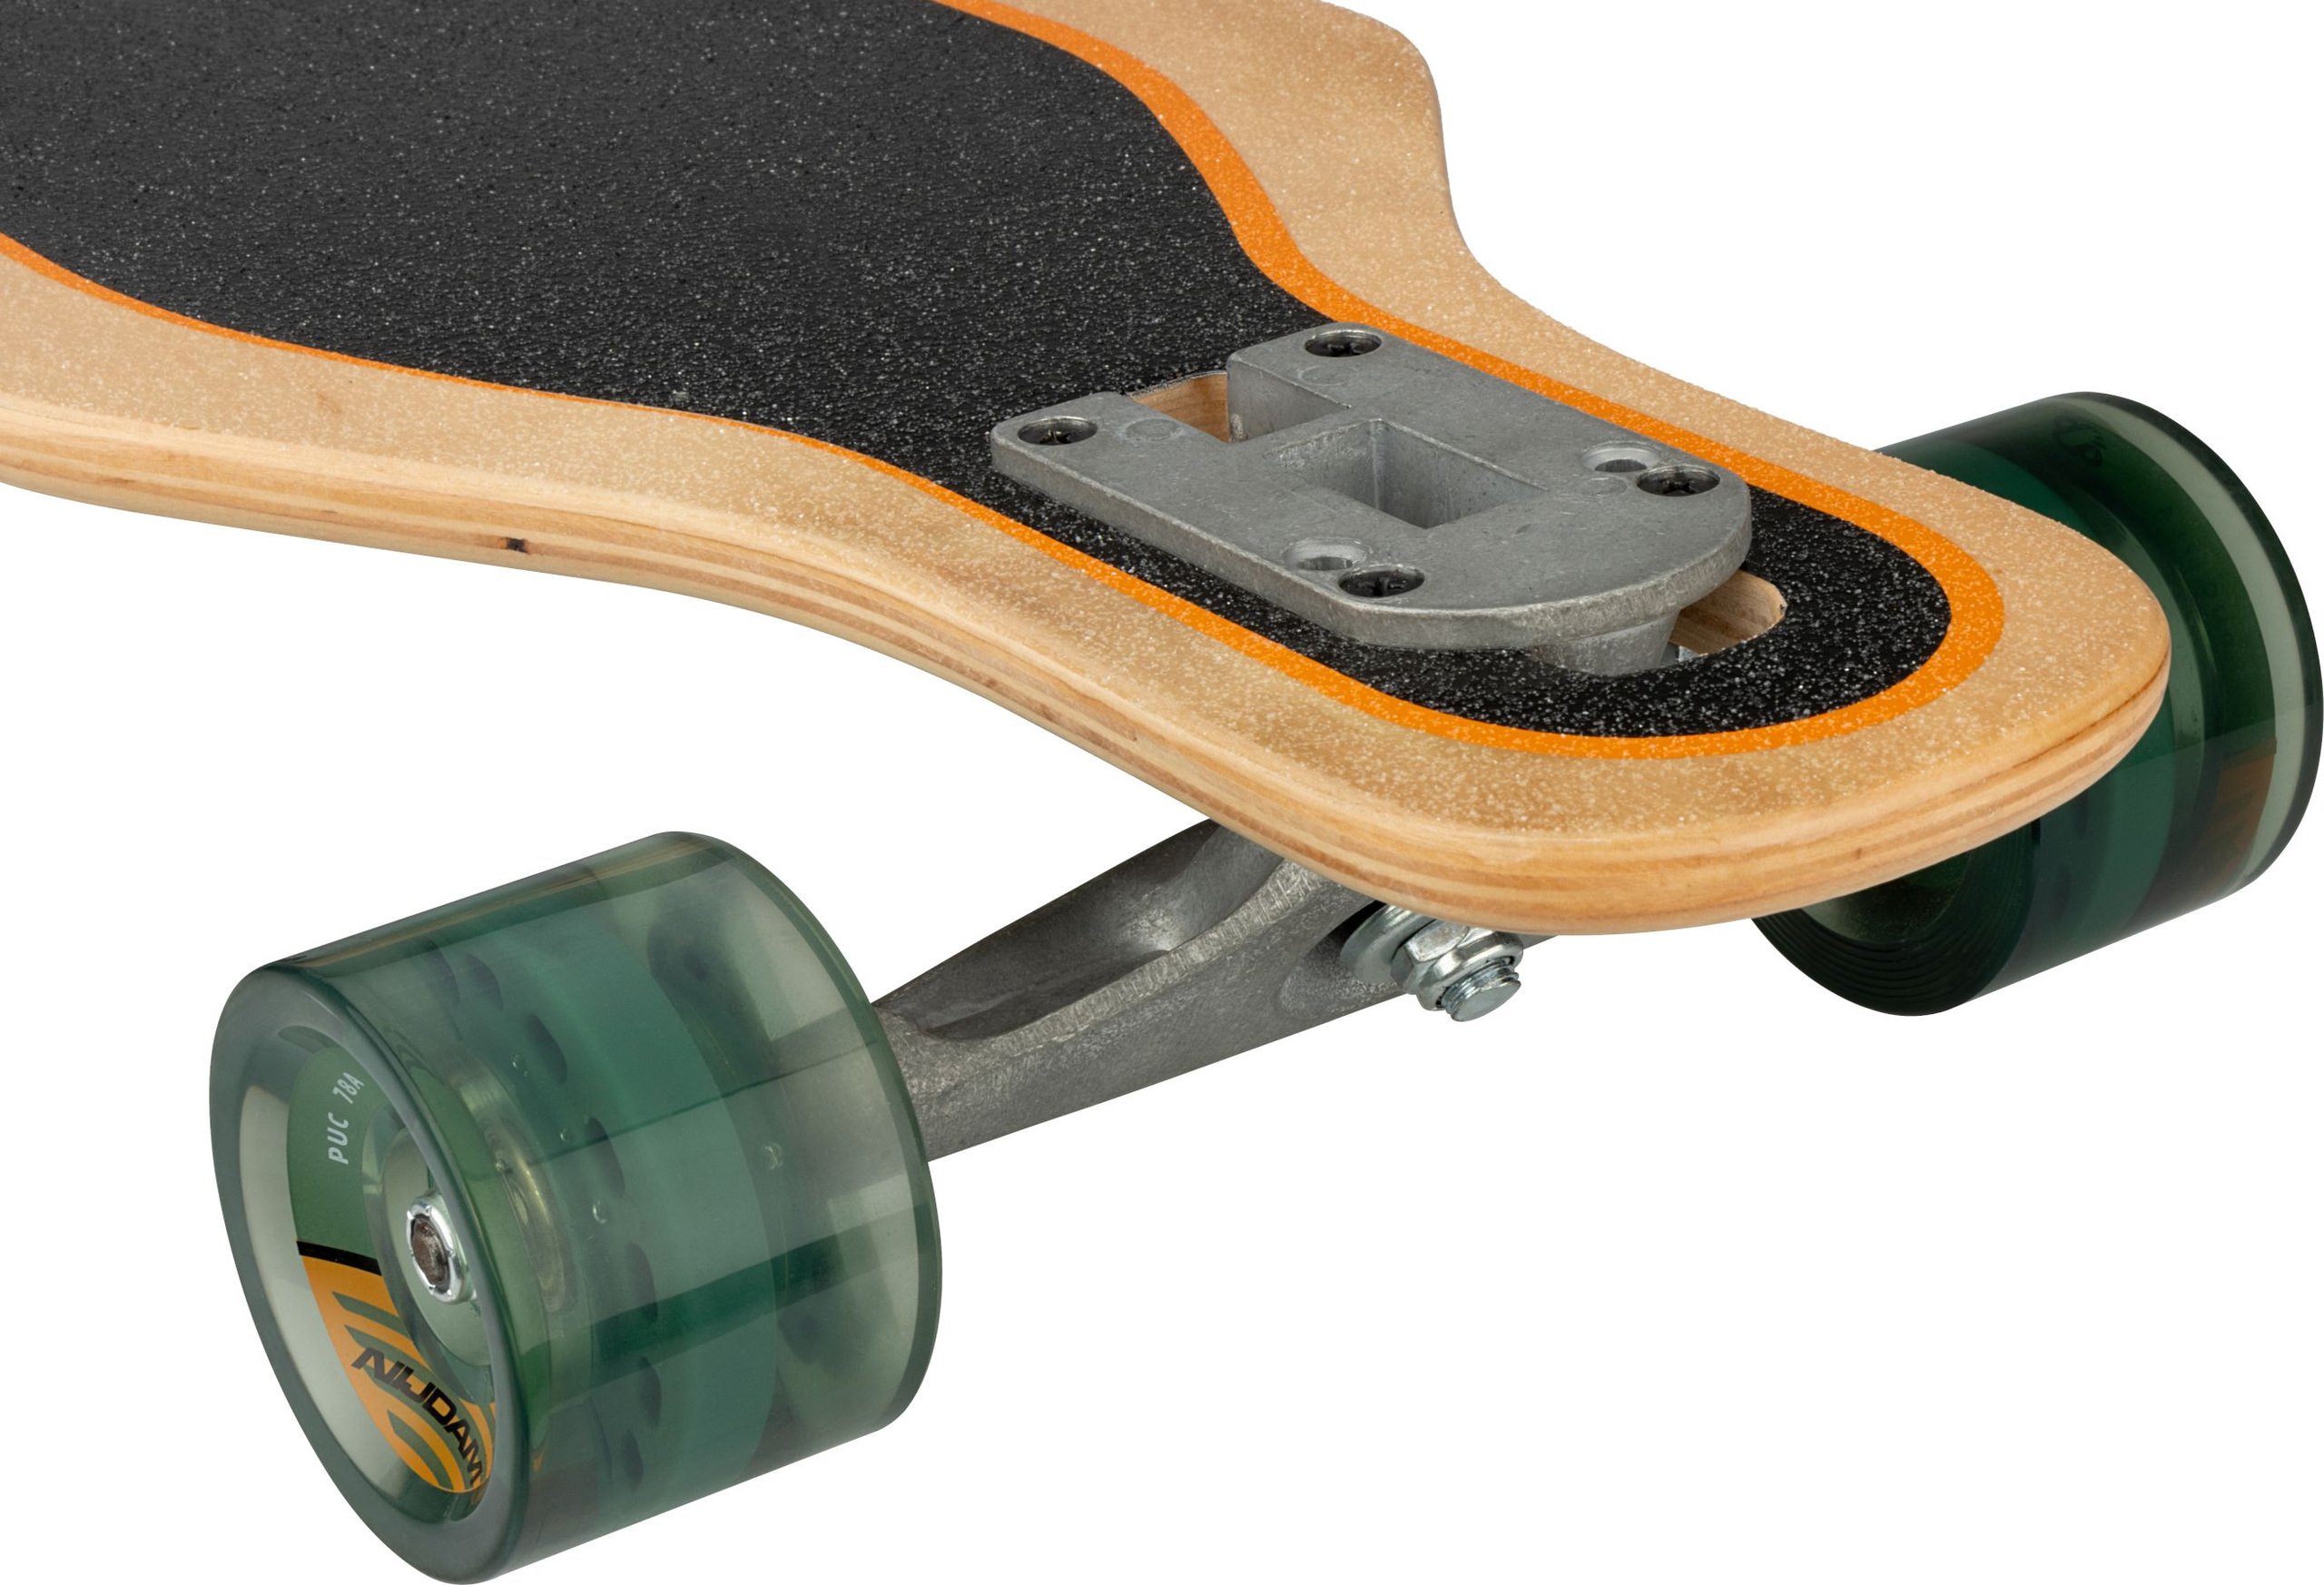 N32BC01 - Longboard Drop-Through 36" - Echo Coco - Design, development and  trade of winning sports, outdoor and leisure goods